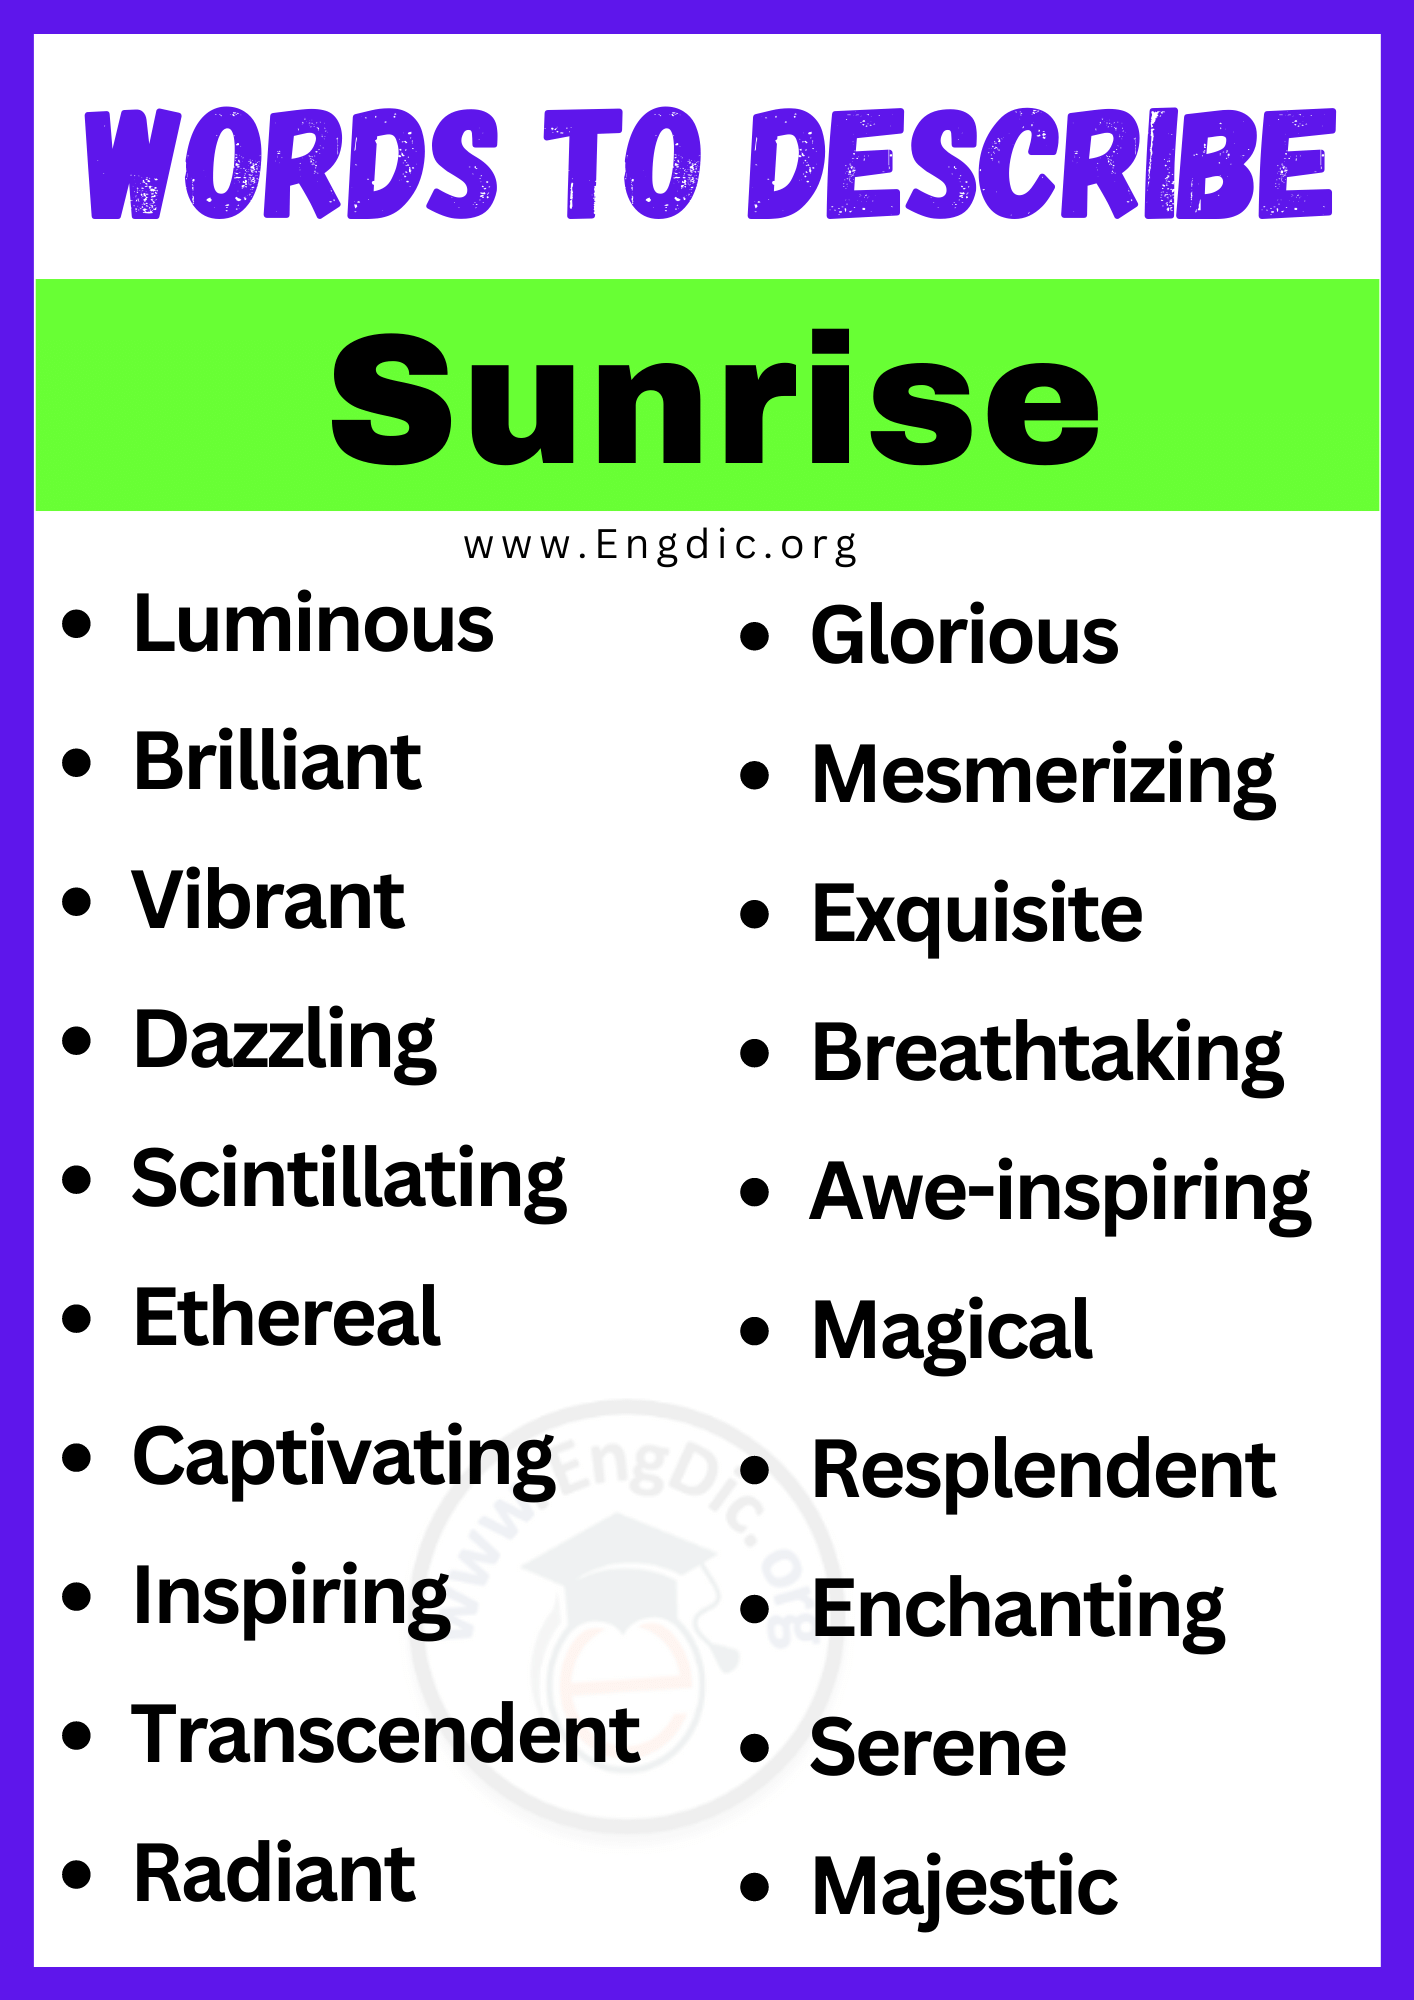 Words to Describe Sunrise